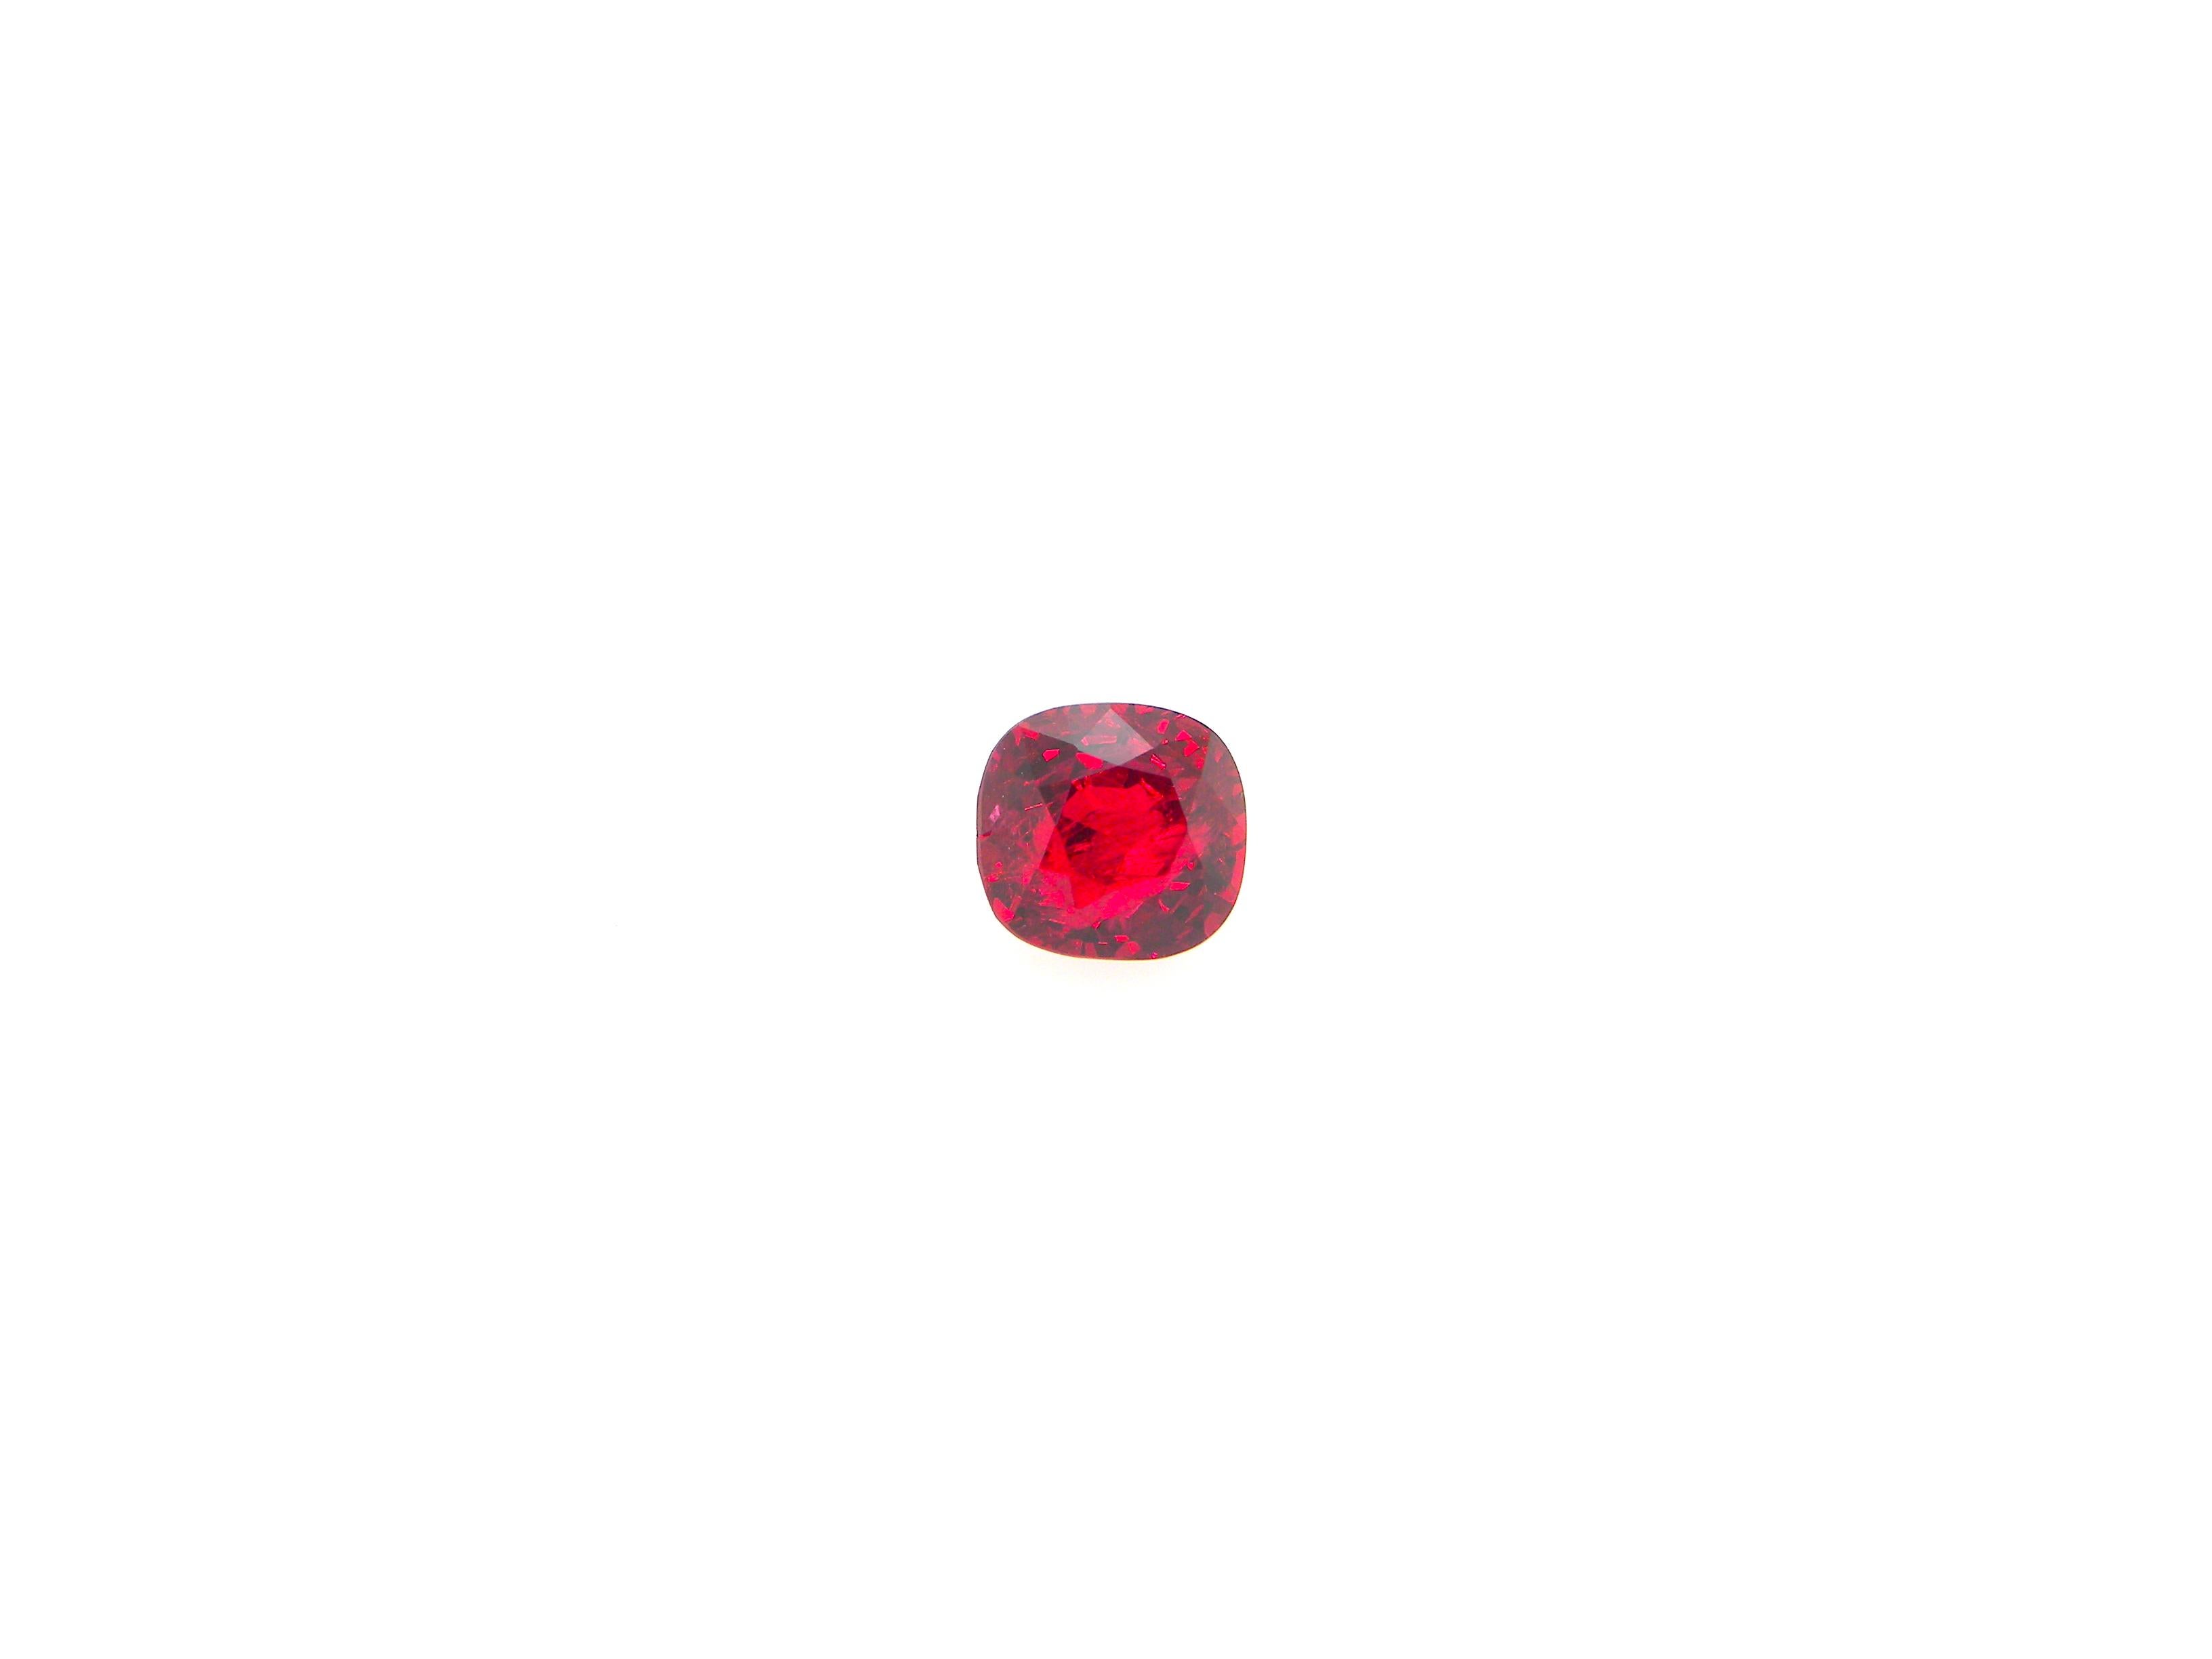 2.02 Carat GRS Certified Cushion-Cut Burma No Heat Vivid Red Spinel:

A gorgeous gem, it is a 2.02 carat GRS certified unheated vivid red Burmese spinel. Hailing from the historic Mogok mines in Burma, the spinel possesses a pure vivid red colour